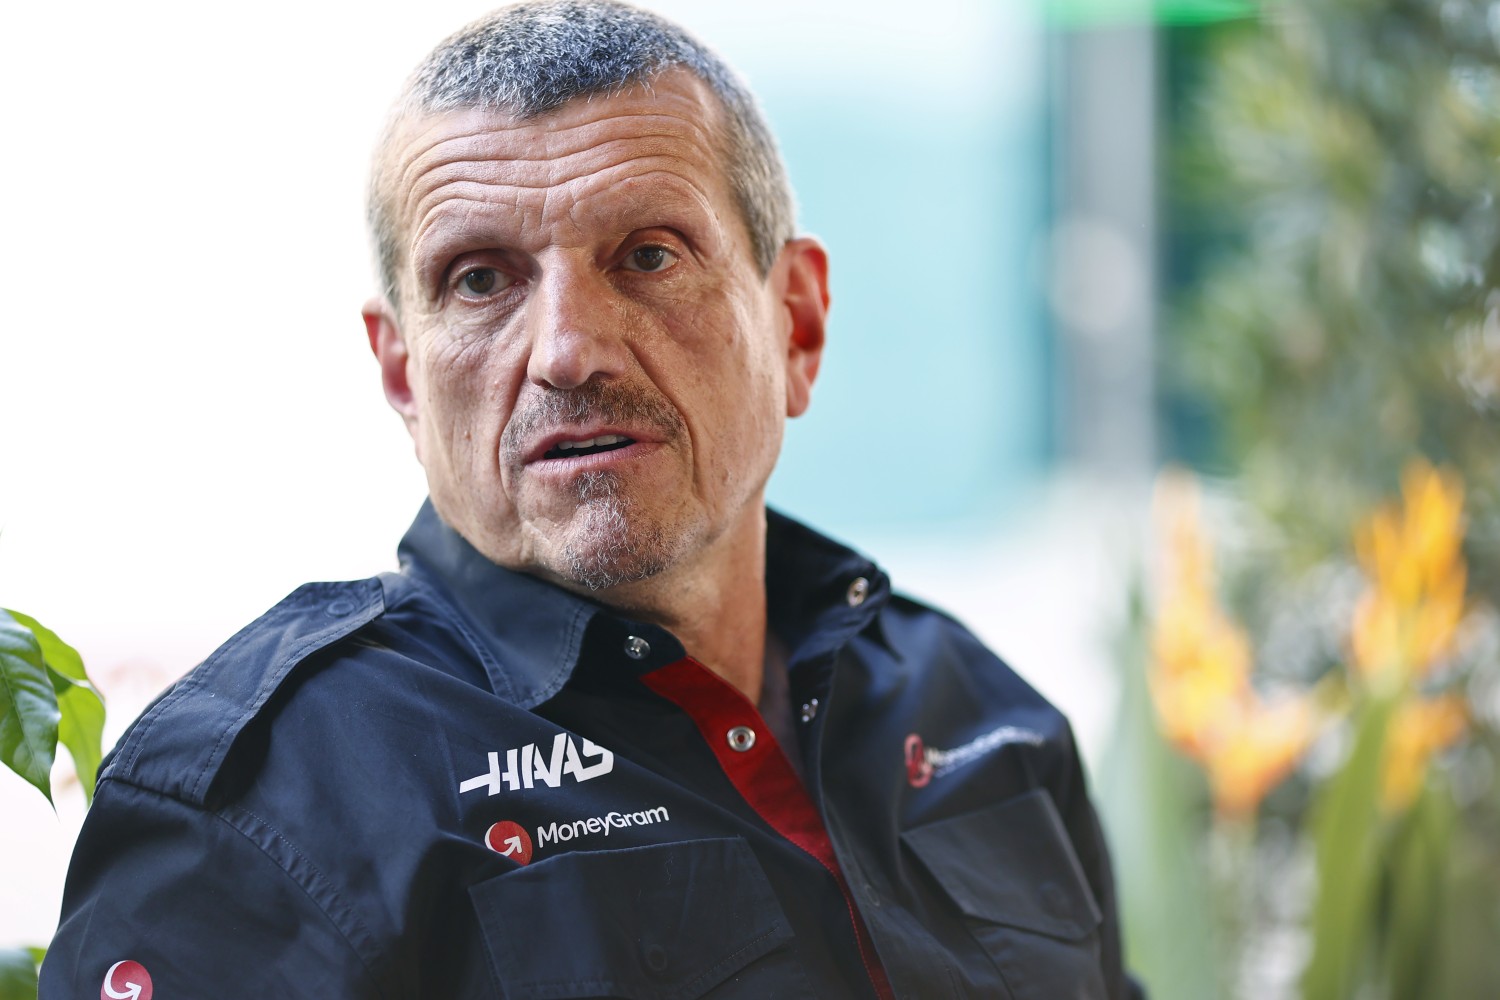 Guenther Steiner, Team Principal, Haas F1 Team, speaks to reporters during the Singapore GP at Marina Bay Street Circuit on Thursday September 14, 2023 in Singapore, Singapore. (Photo by Andy Hone / LAT Images)